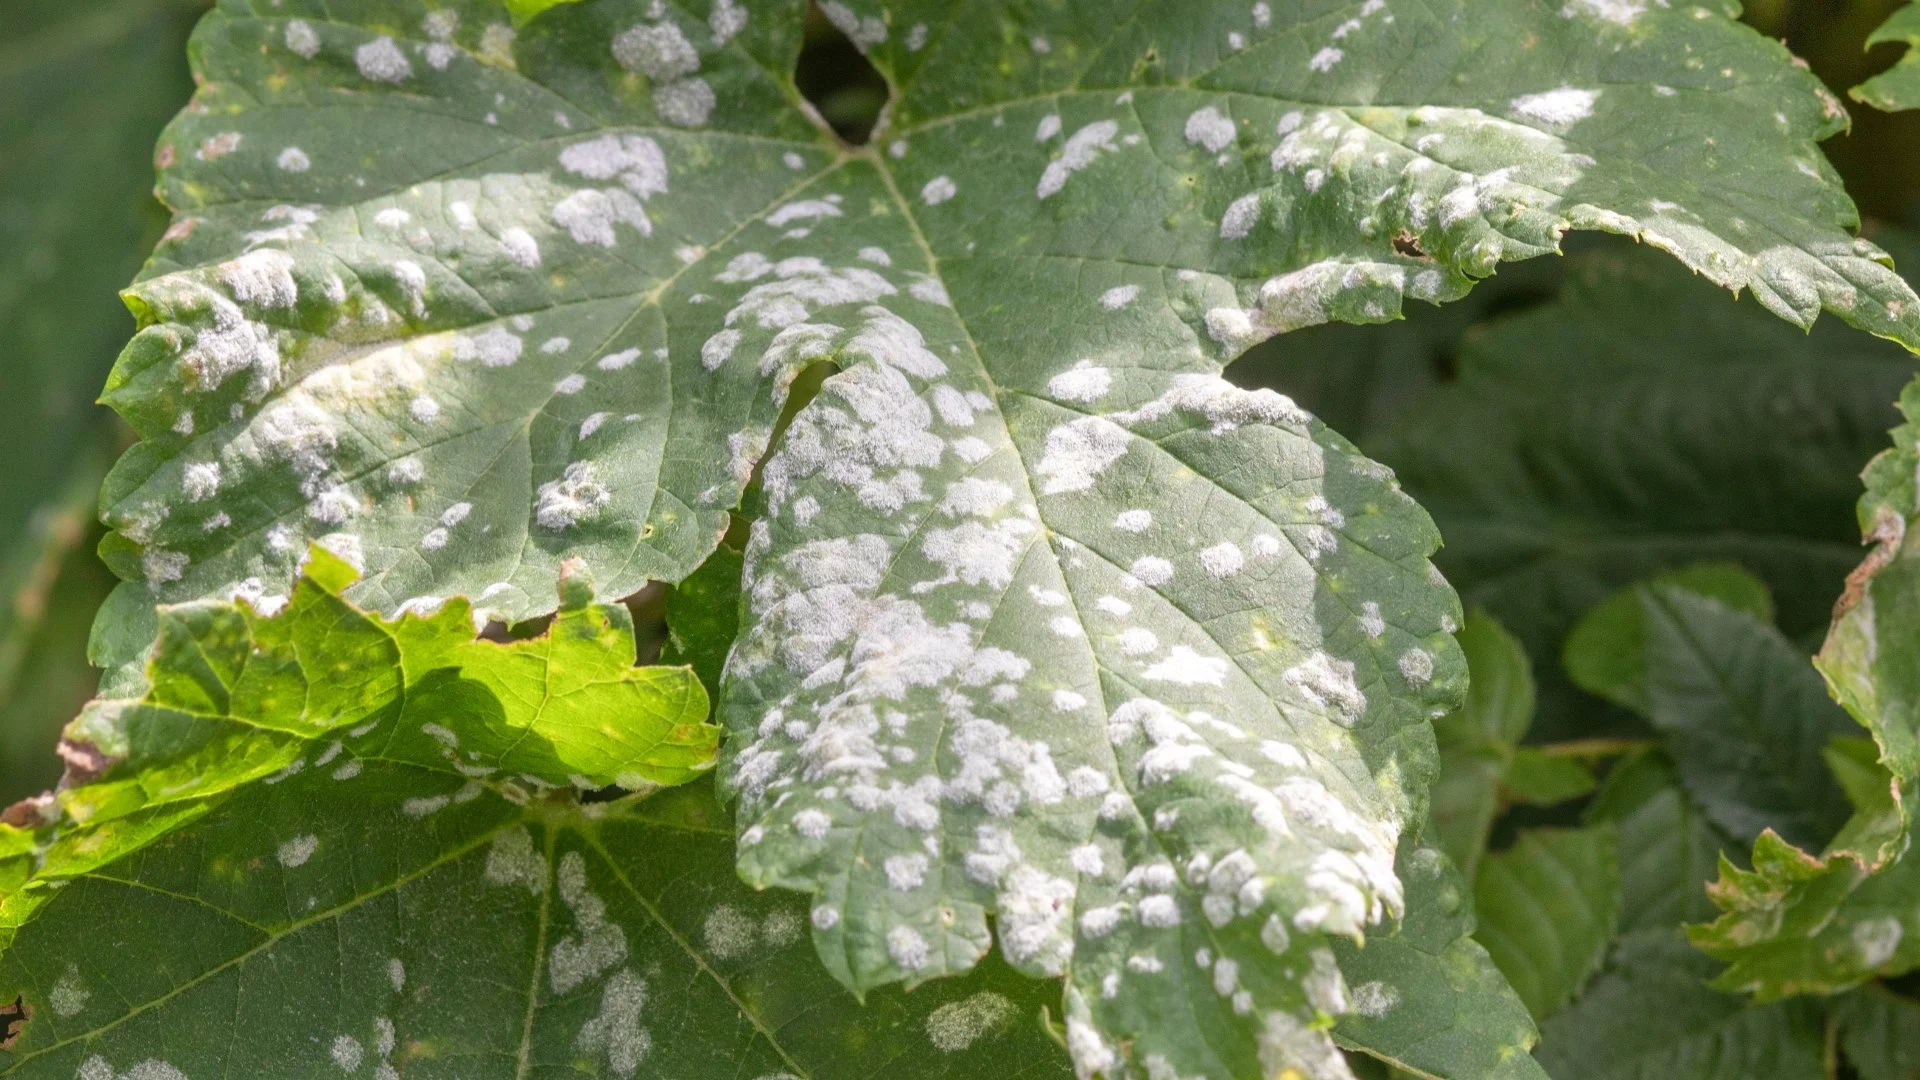 What Is Powdery Mildew & What Should You Do if It Infects Your Plants?